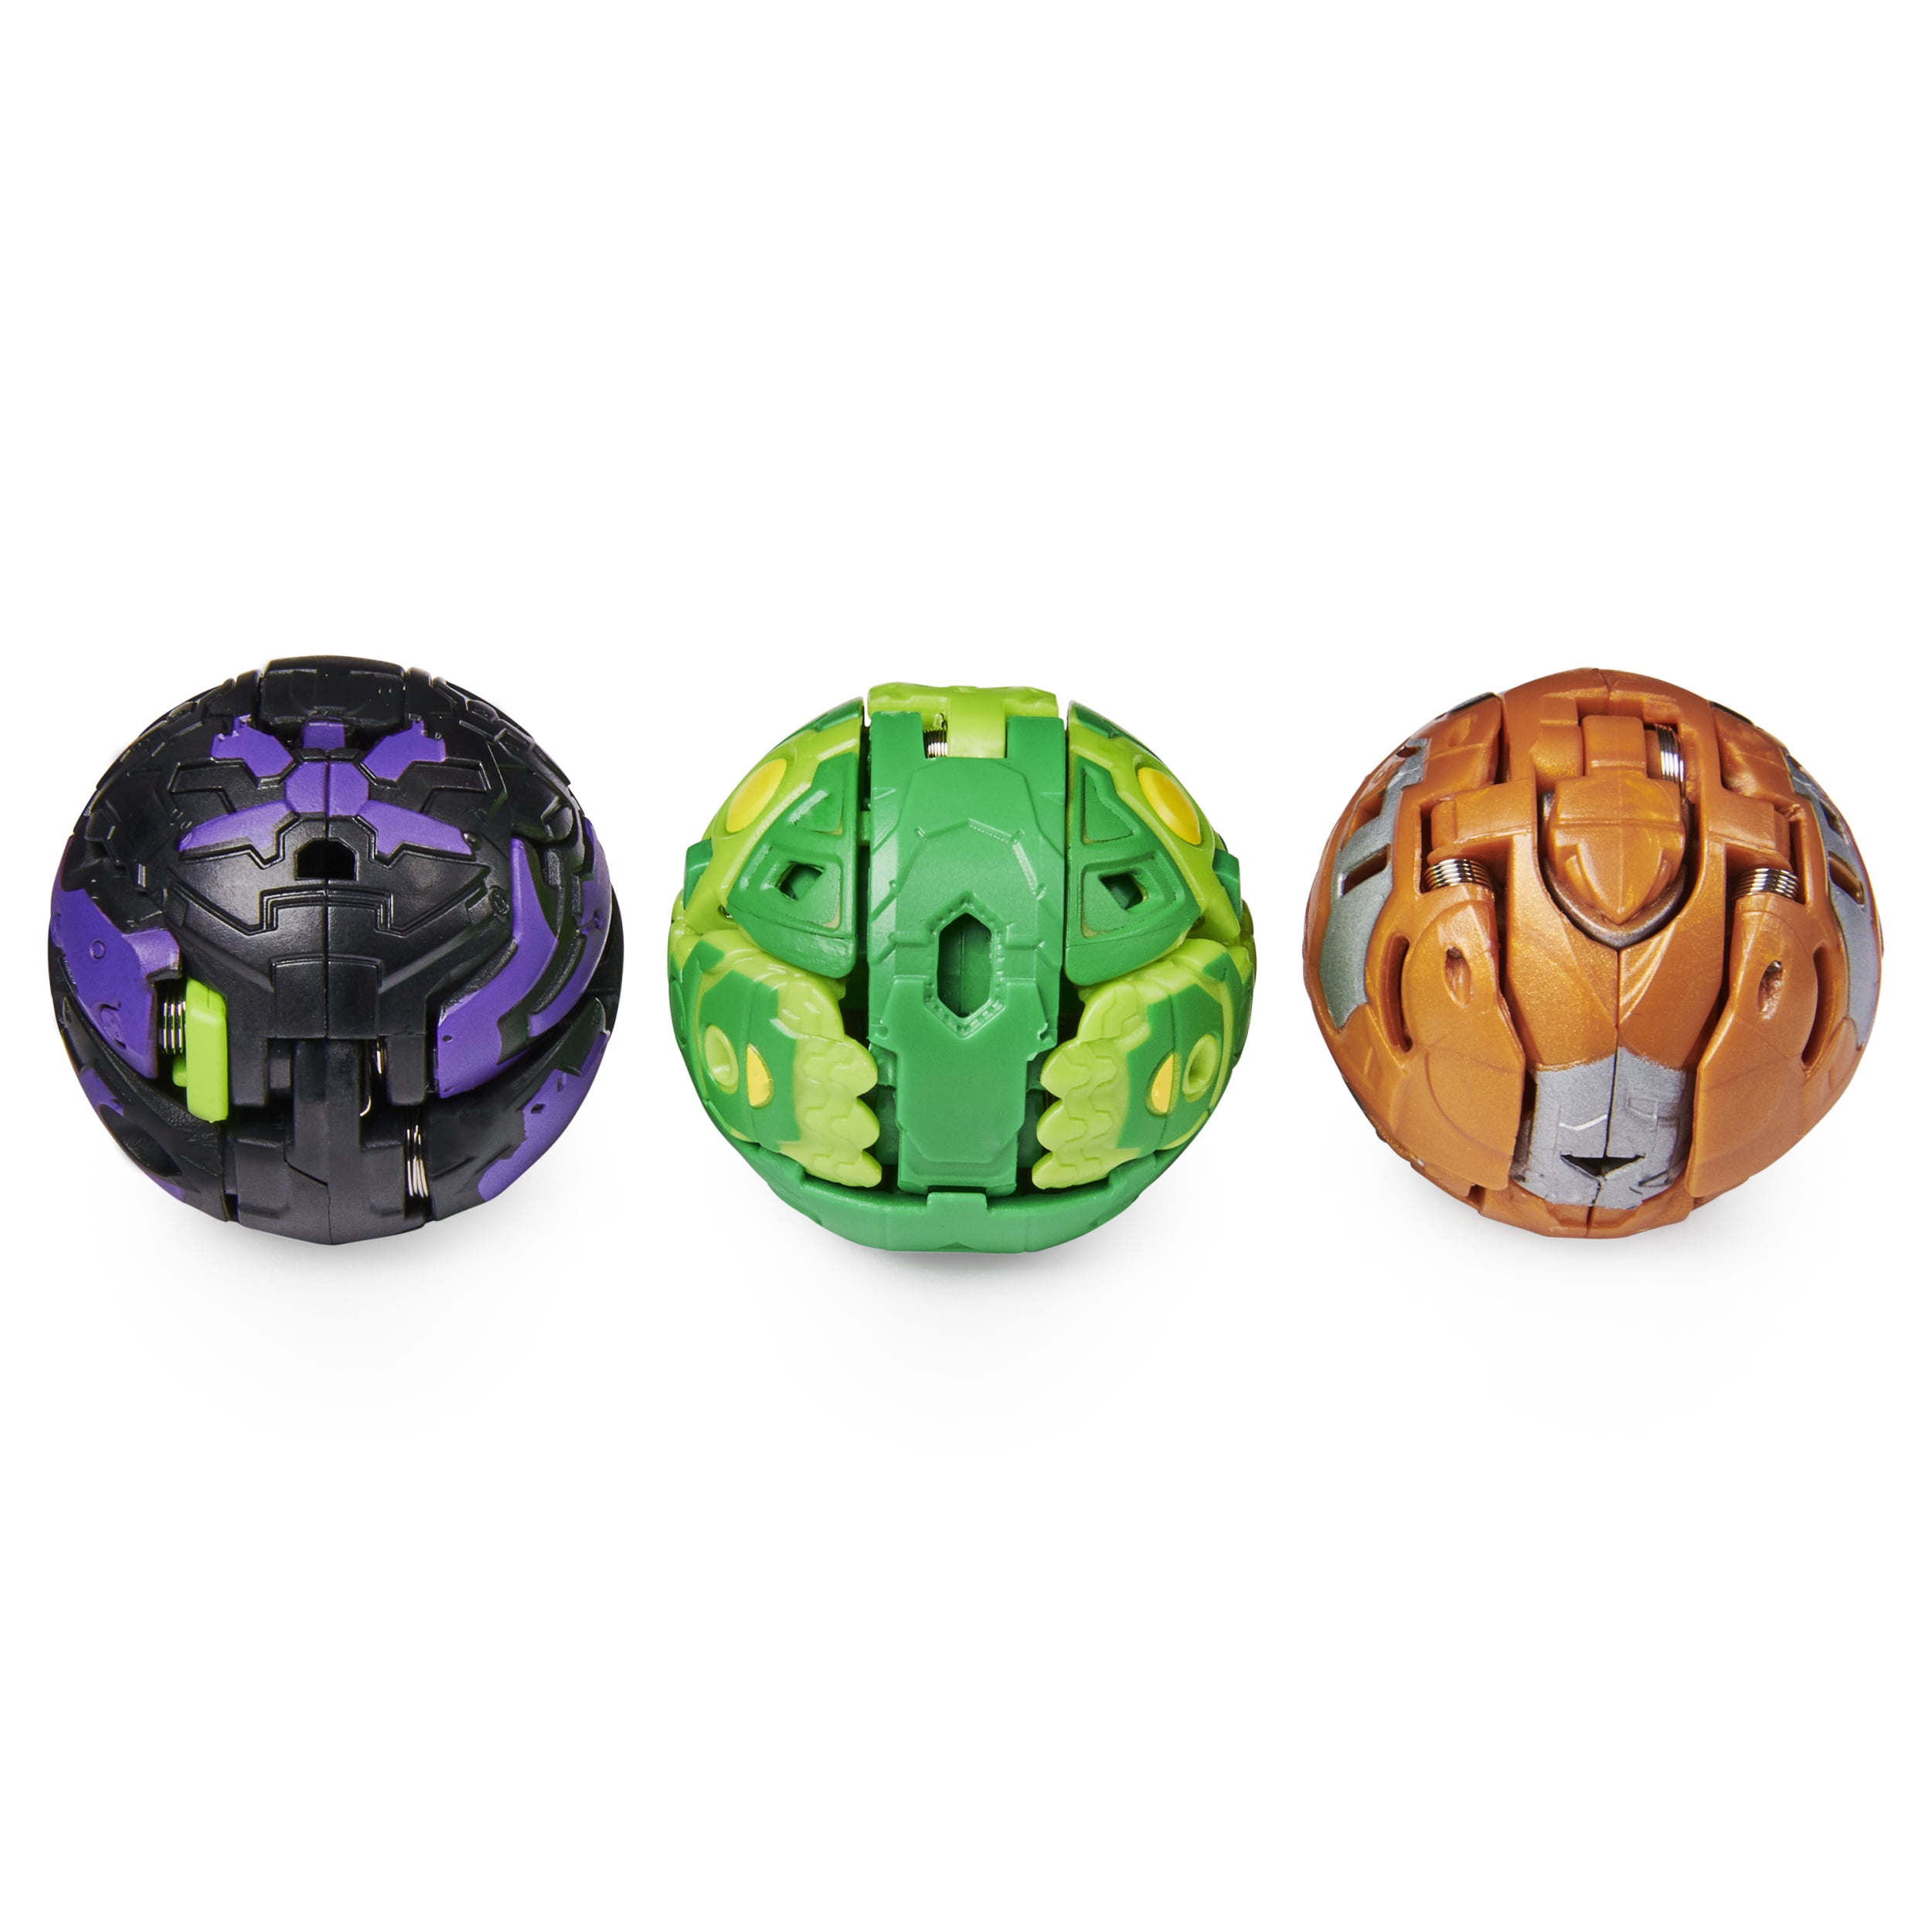 Bakugan Starter Pack 3-Pack, Ventus Garganoid, Collectible Action Figures,  for Ages 6 and Up 